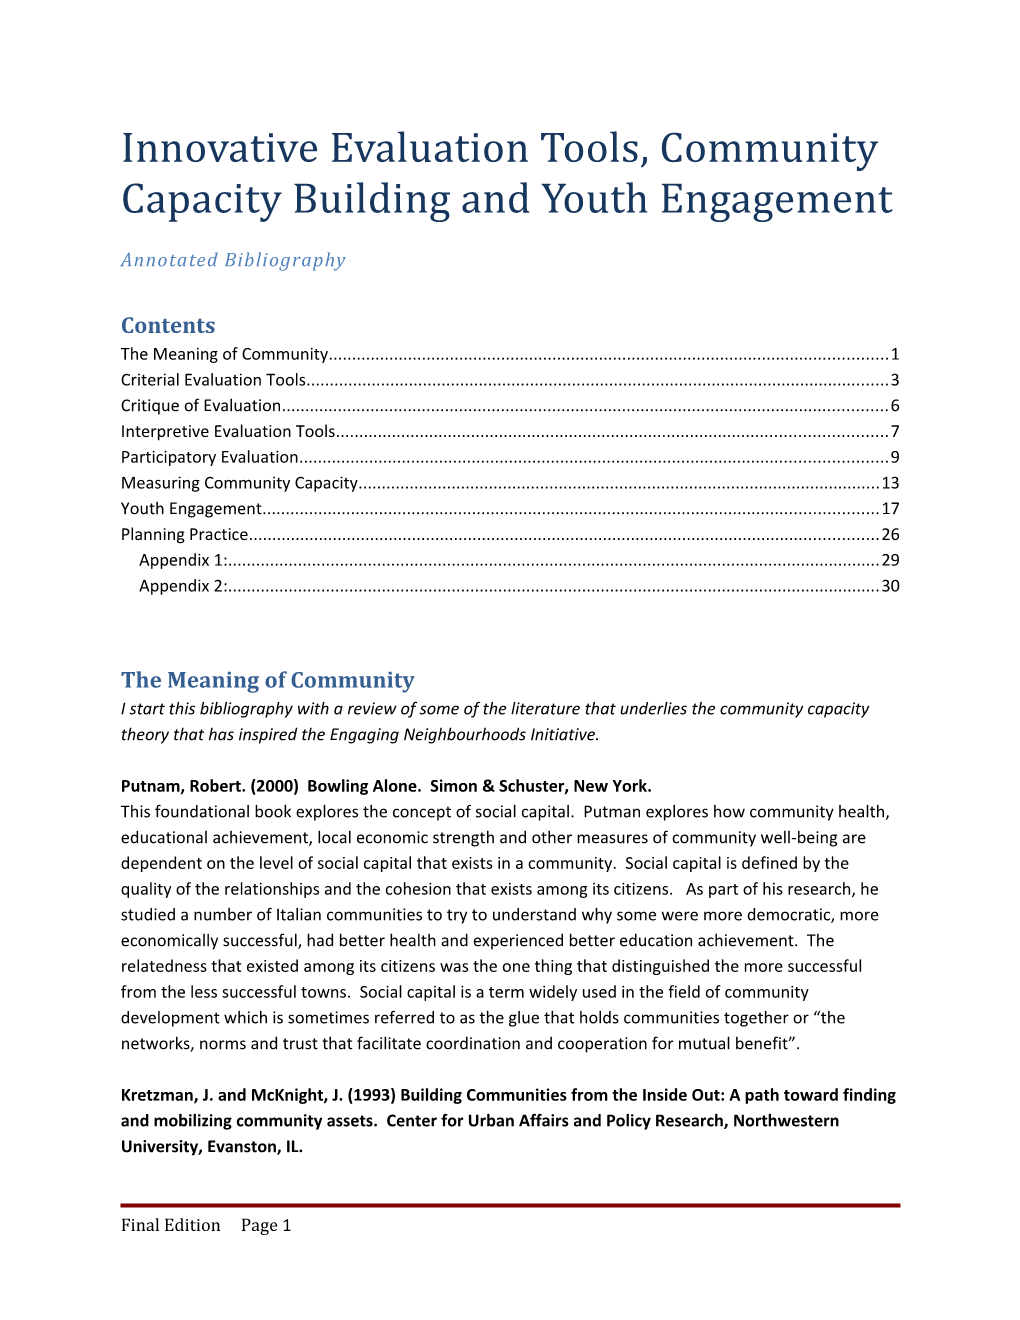 Innovative Evaluation Tools, Community Capacity Building and Youth Engagement